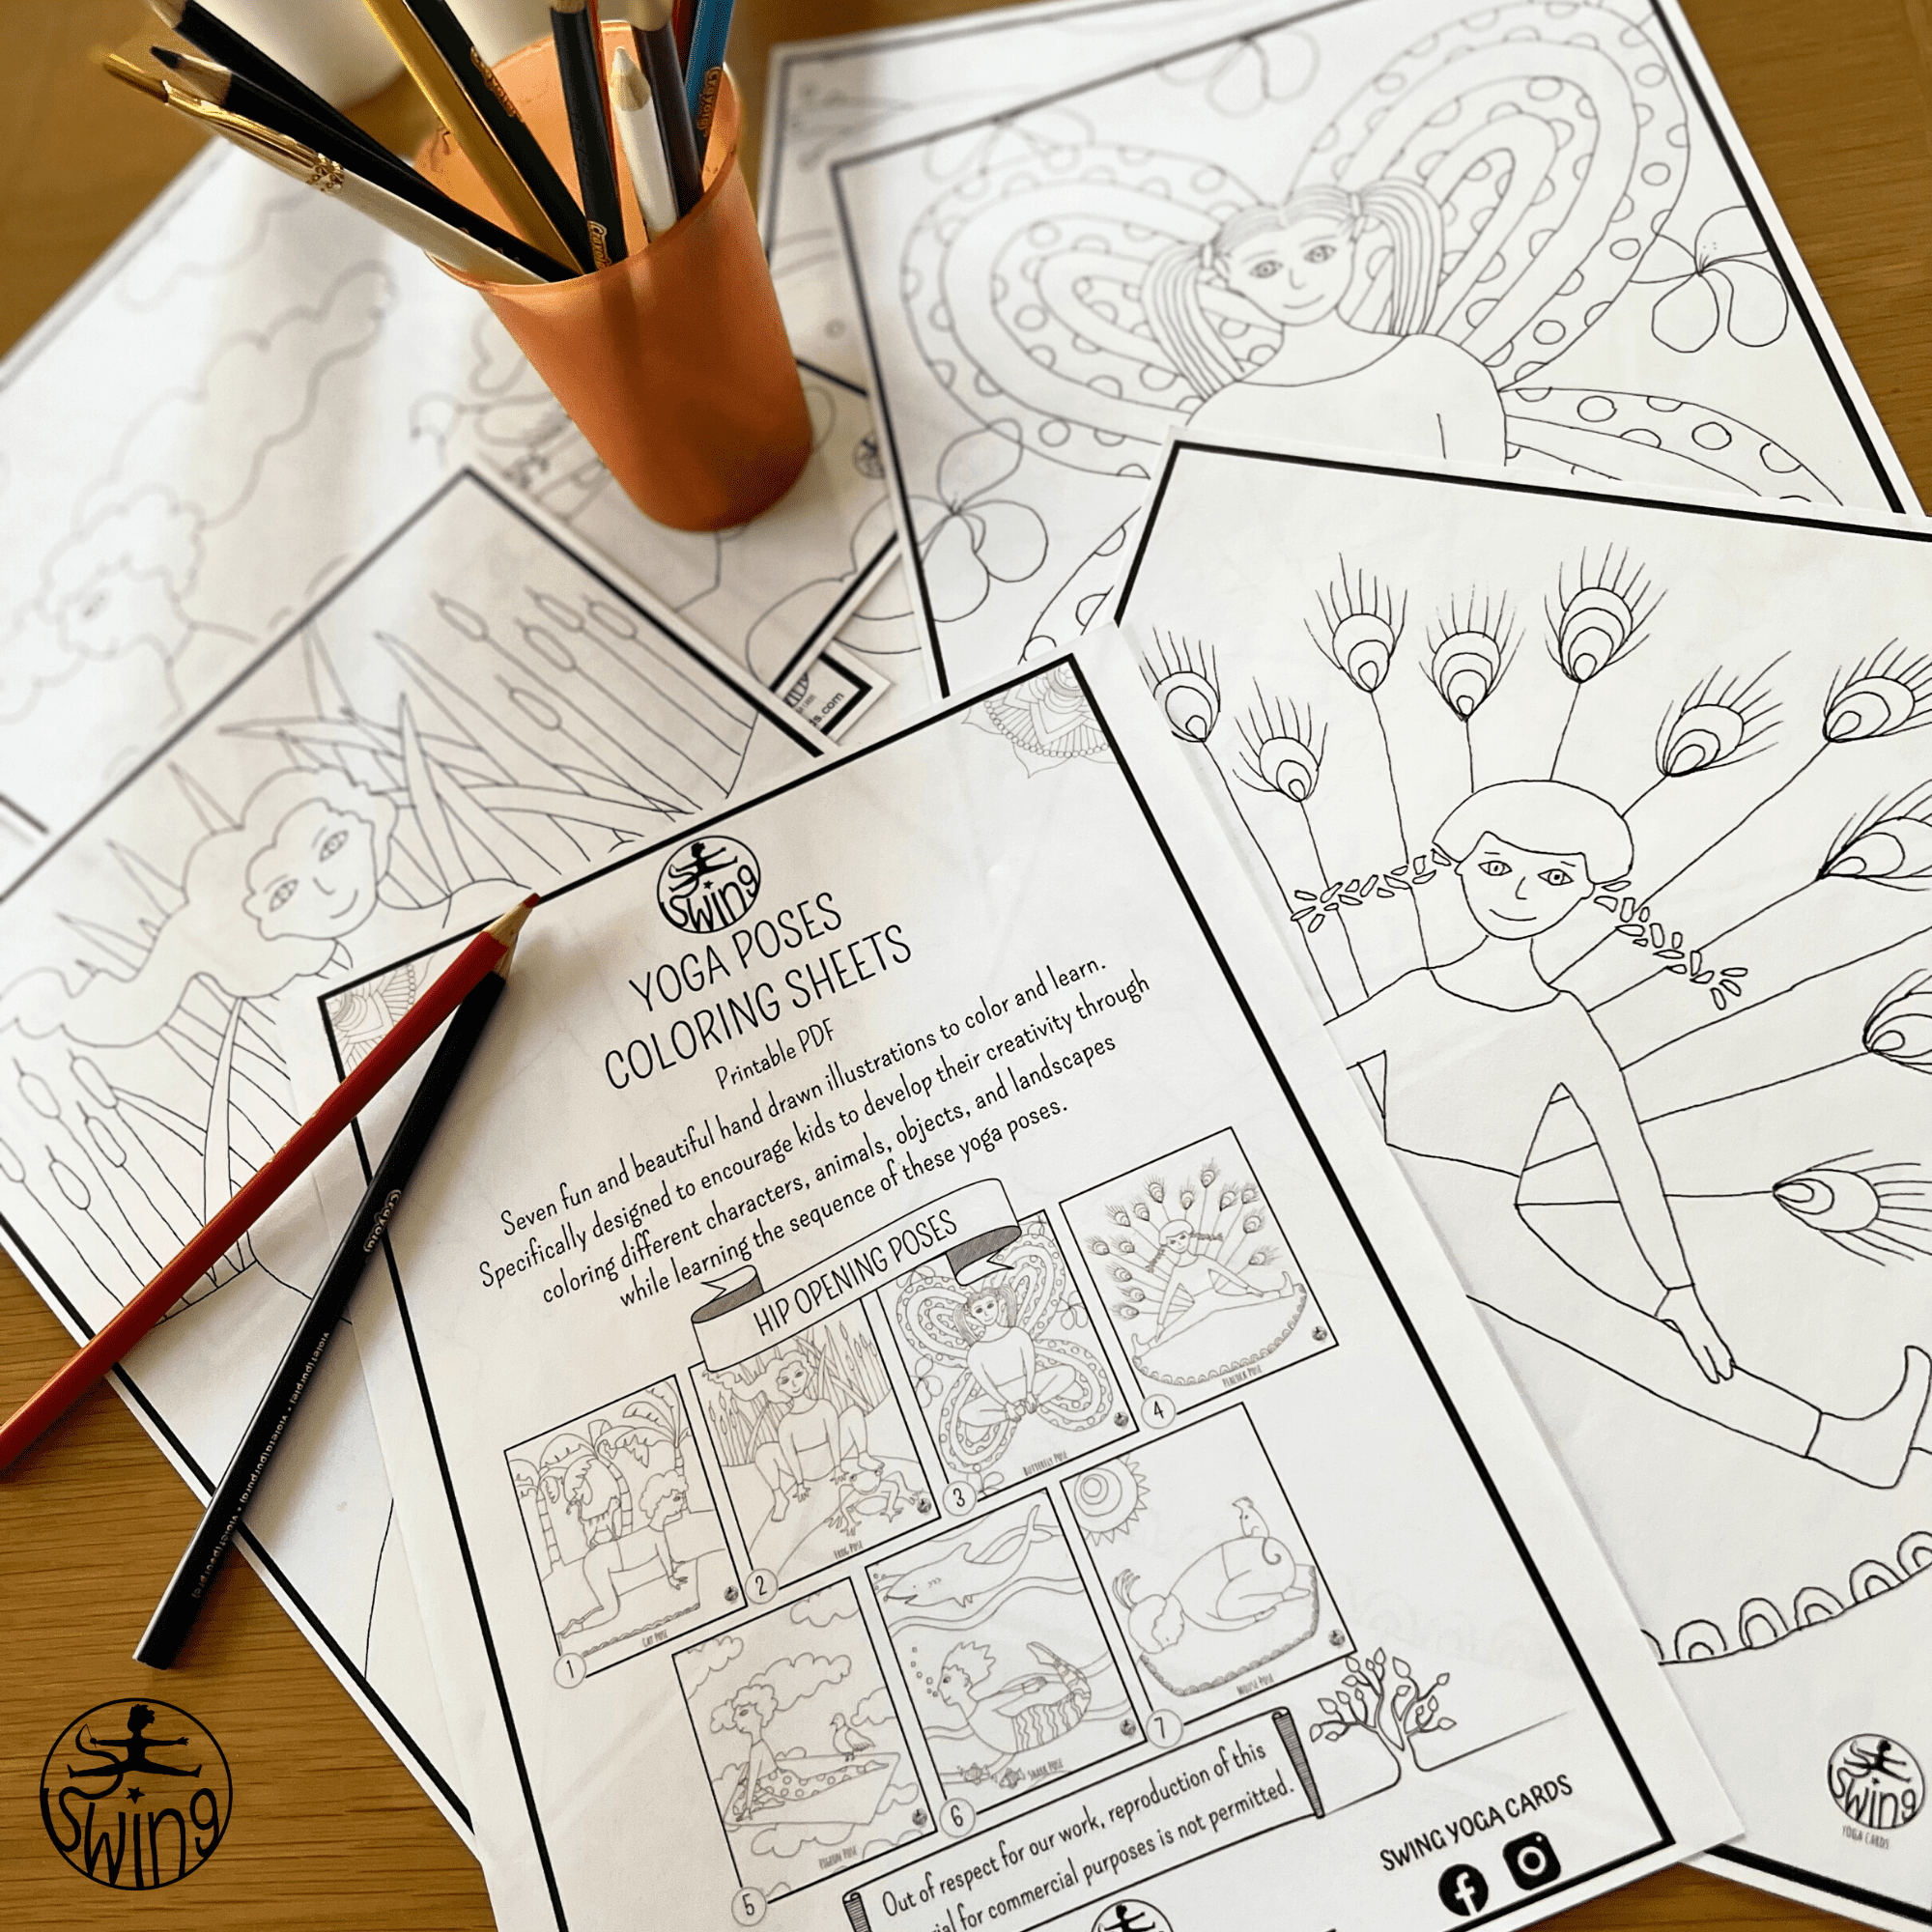 Yoga For Kids Mindful Coloring Pages – One-Stop Counseling Shop